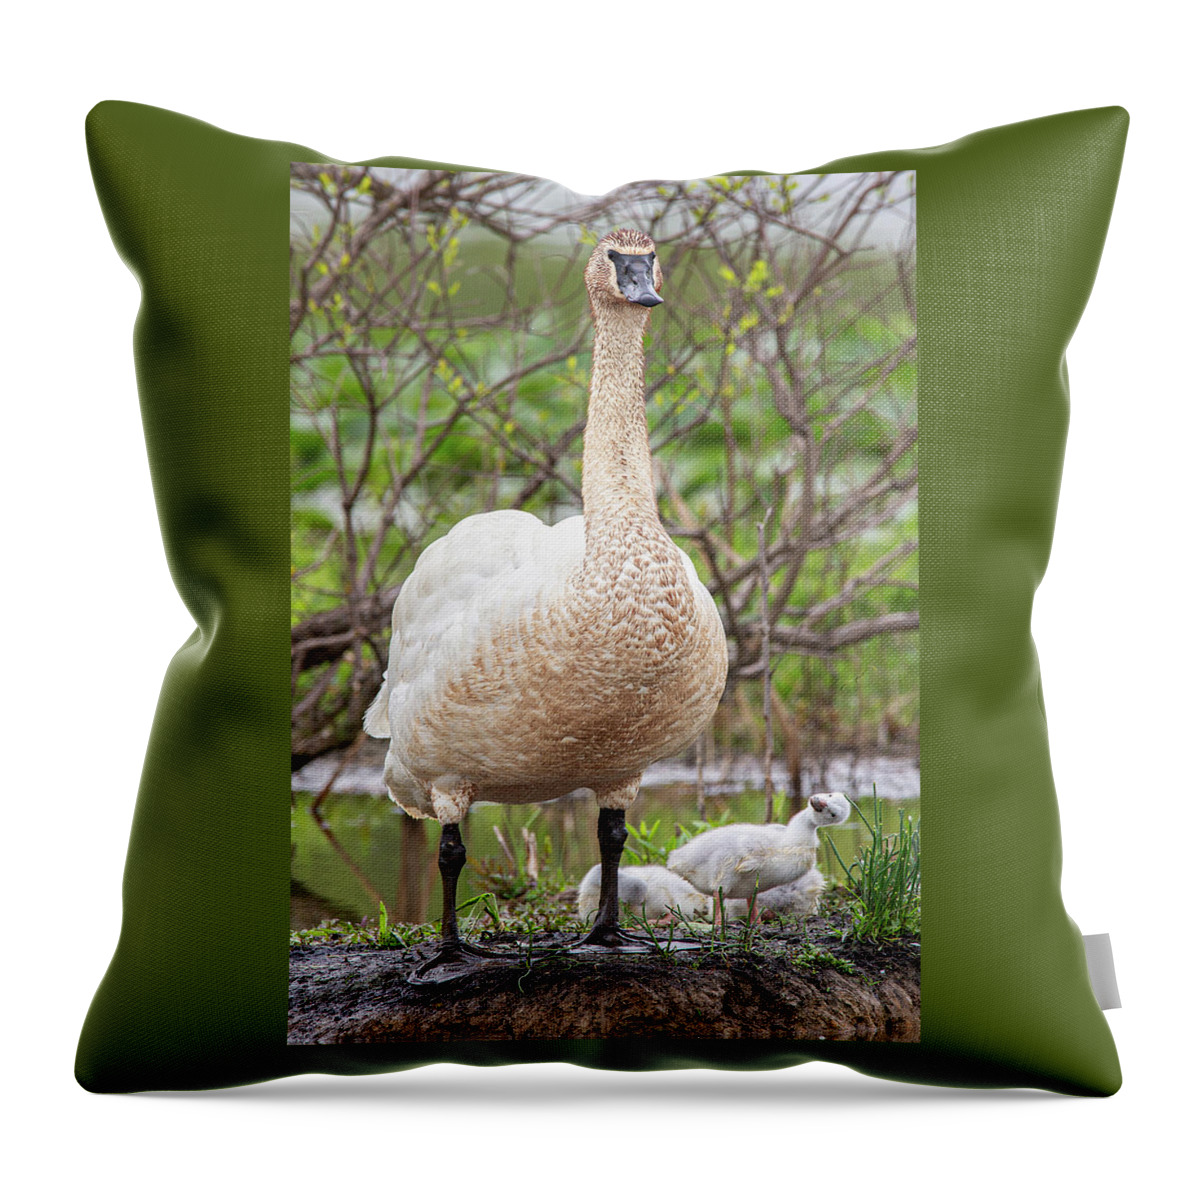 Looking Up To Dad Throw Pillow featuring the photograph Looking Up To Dad by Dale Kincaid